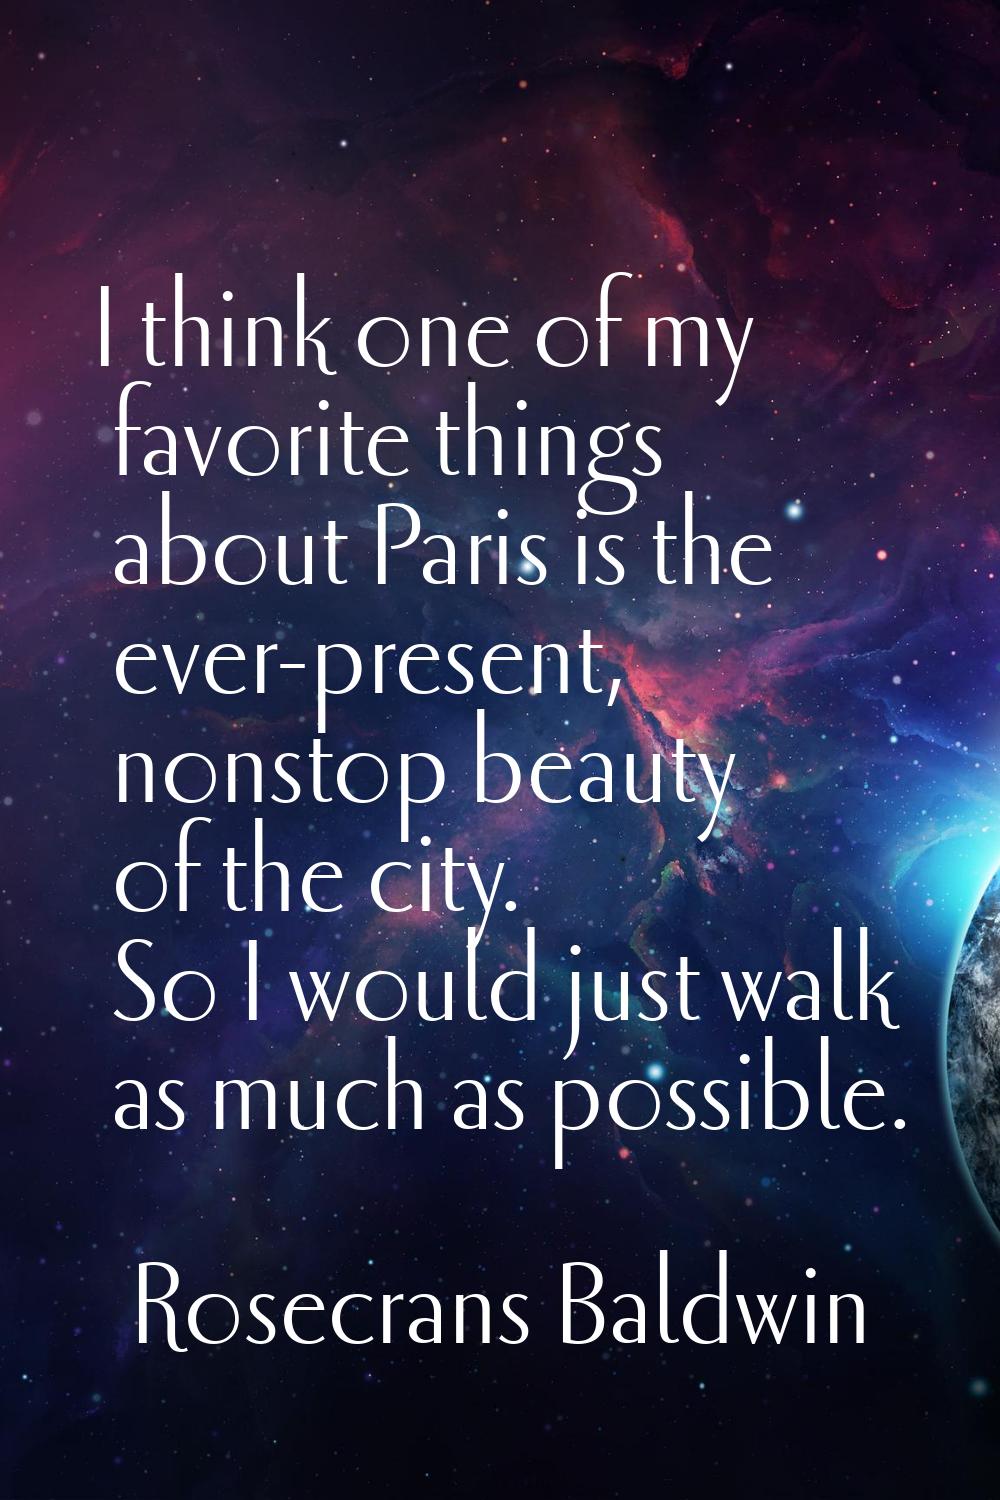 I think one of my favorite things about Paris is the ever-present, nonstop beauty of the city. So I